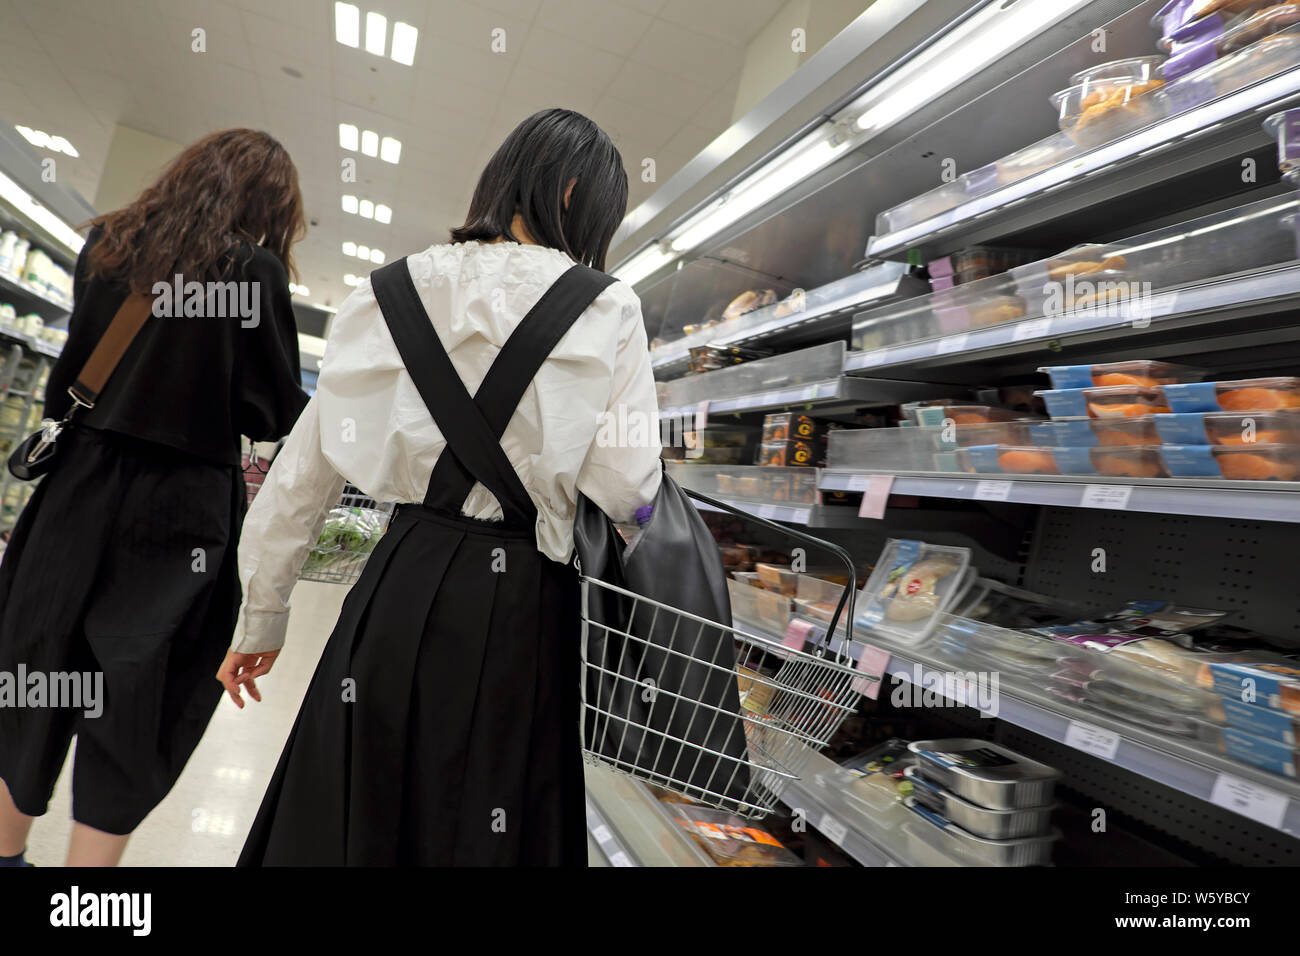 Rear view of two young women customers person shopping in Waitrose supermarket refrigeration aisle London England UK  KATHY DEWITT Stock Photo